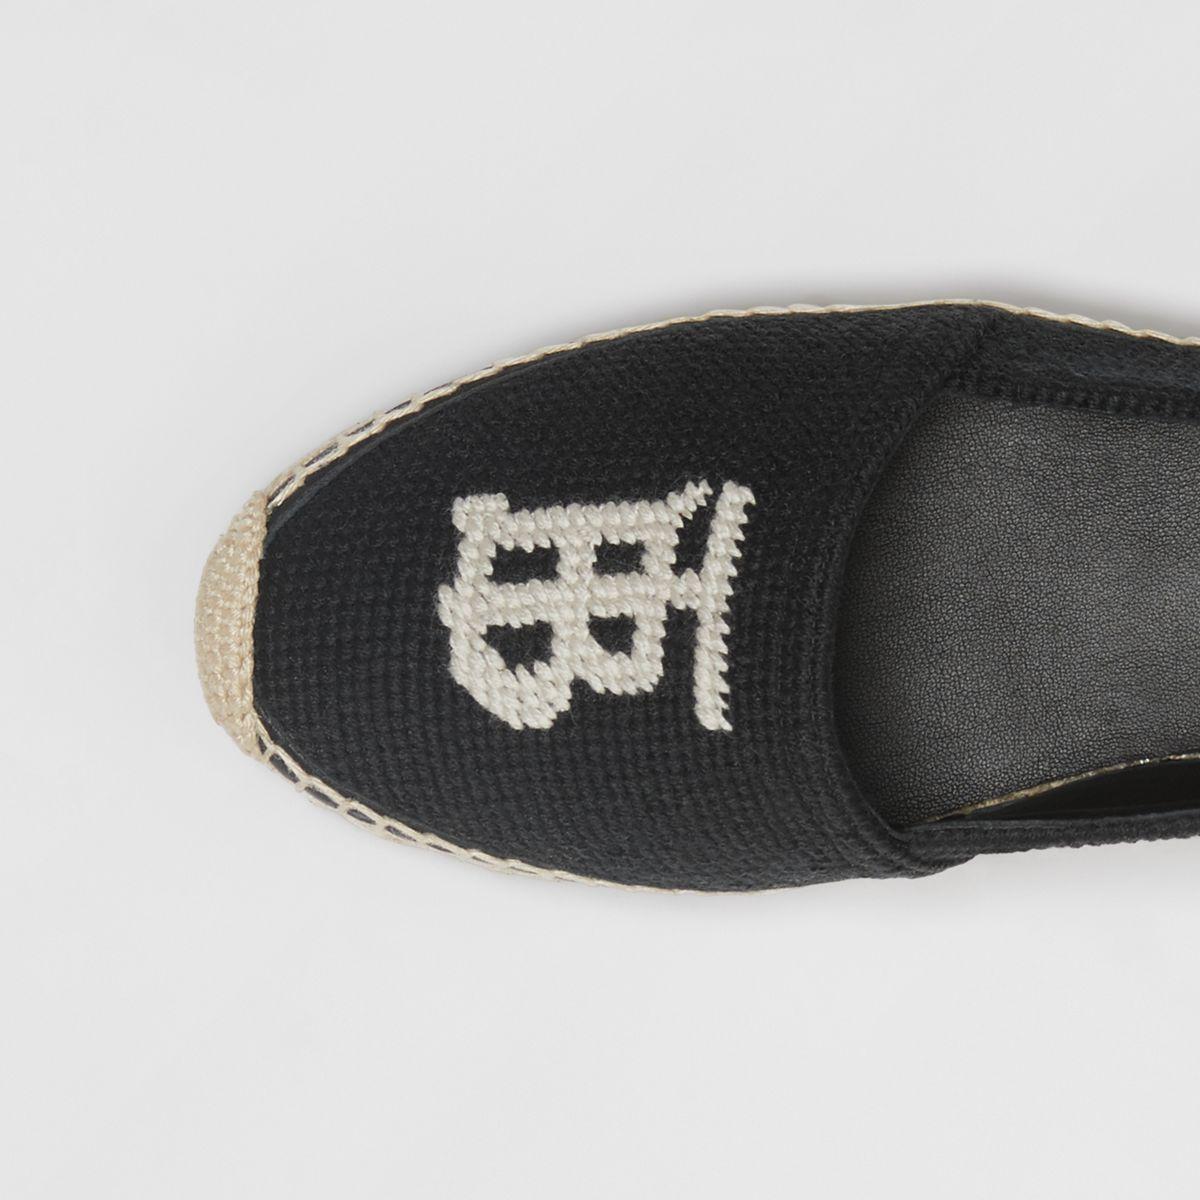 Burberry Monogram Motif Cotton And Leather Espadrilles in Black/White  (Black) | Lyst